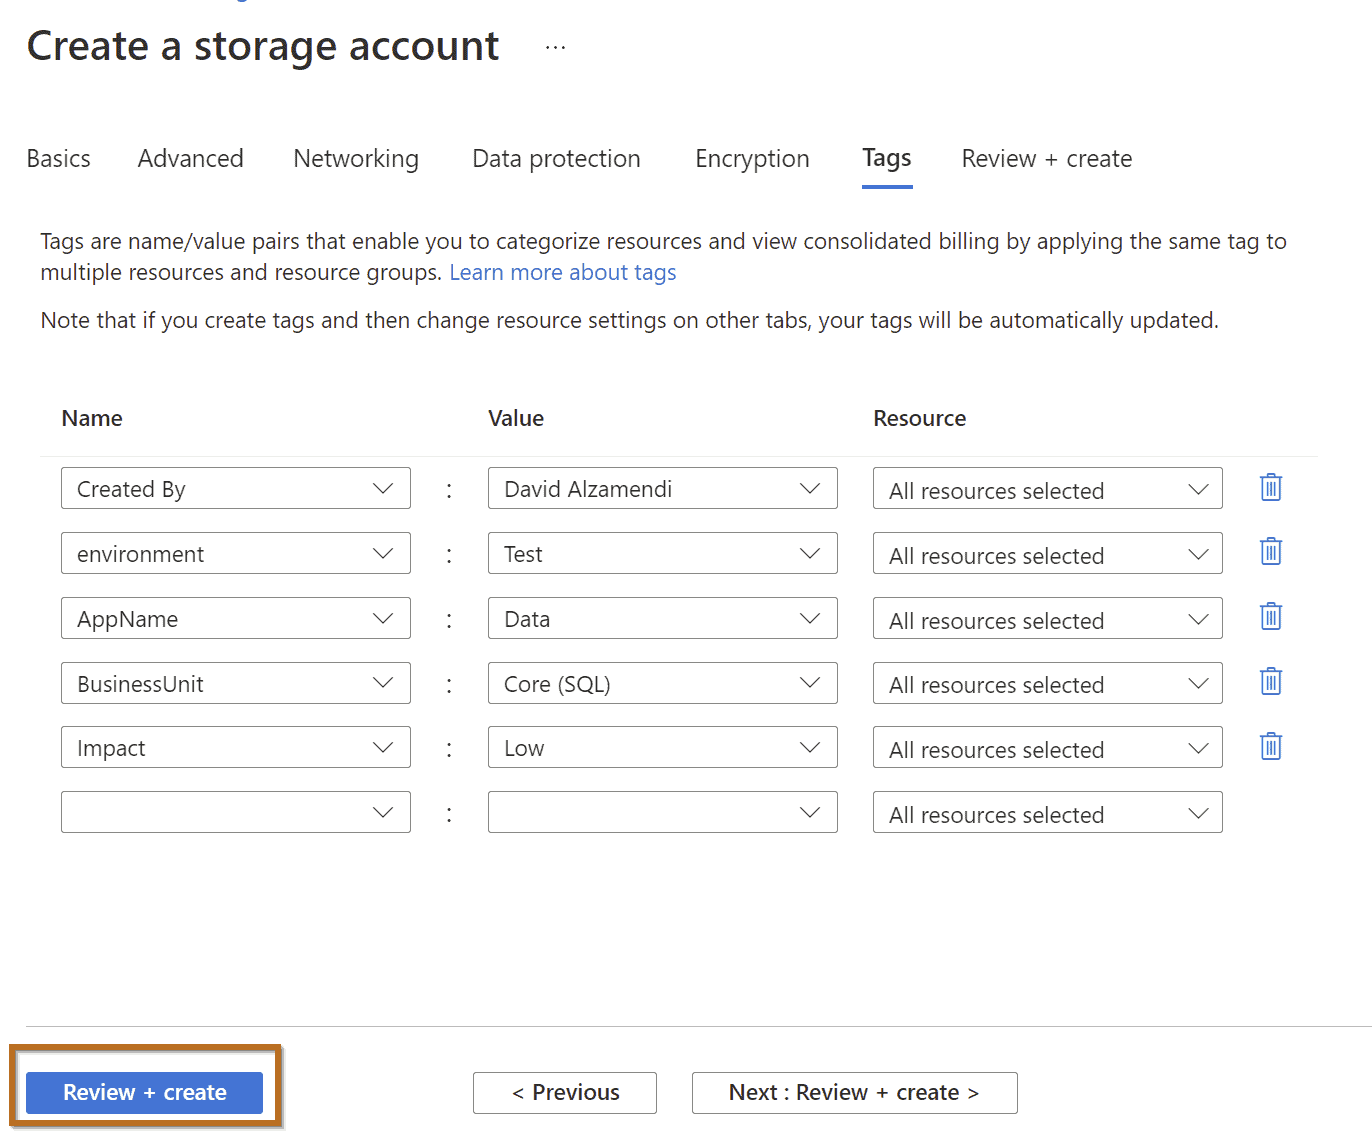 Tags in Storage account